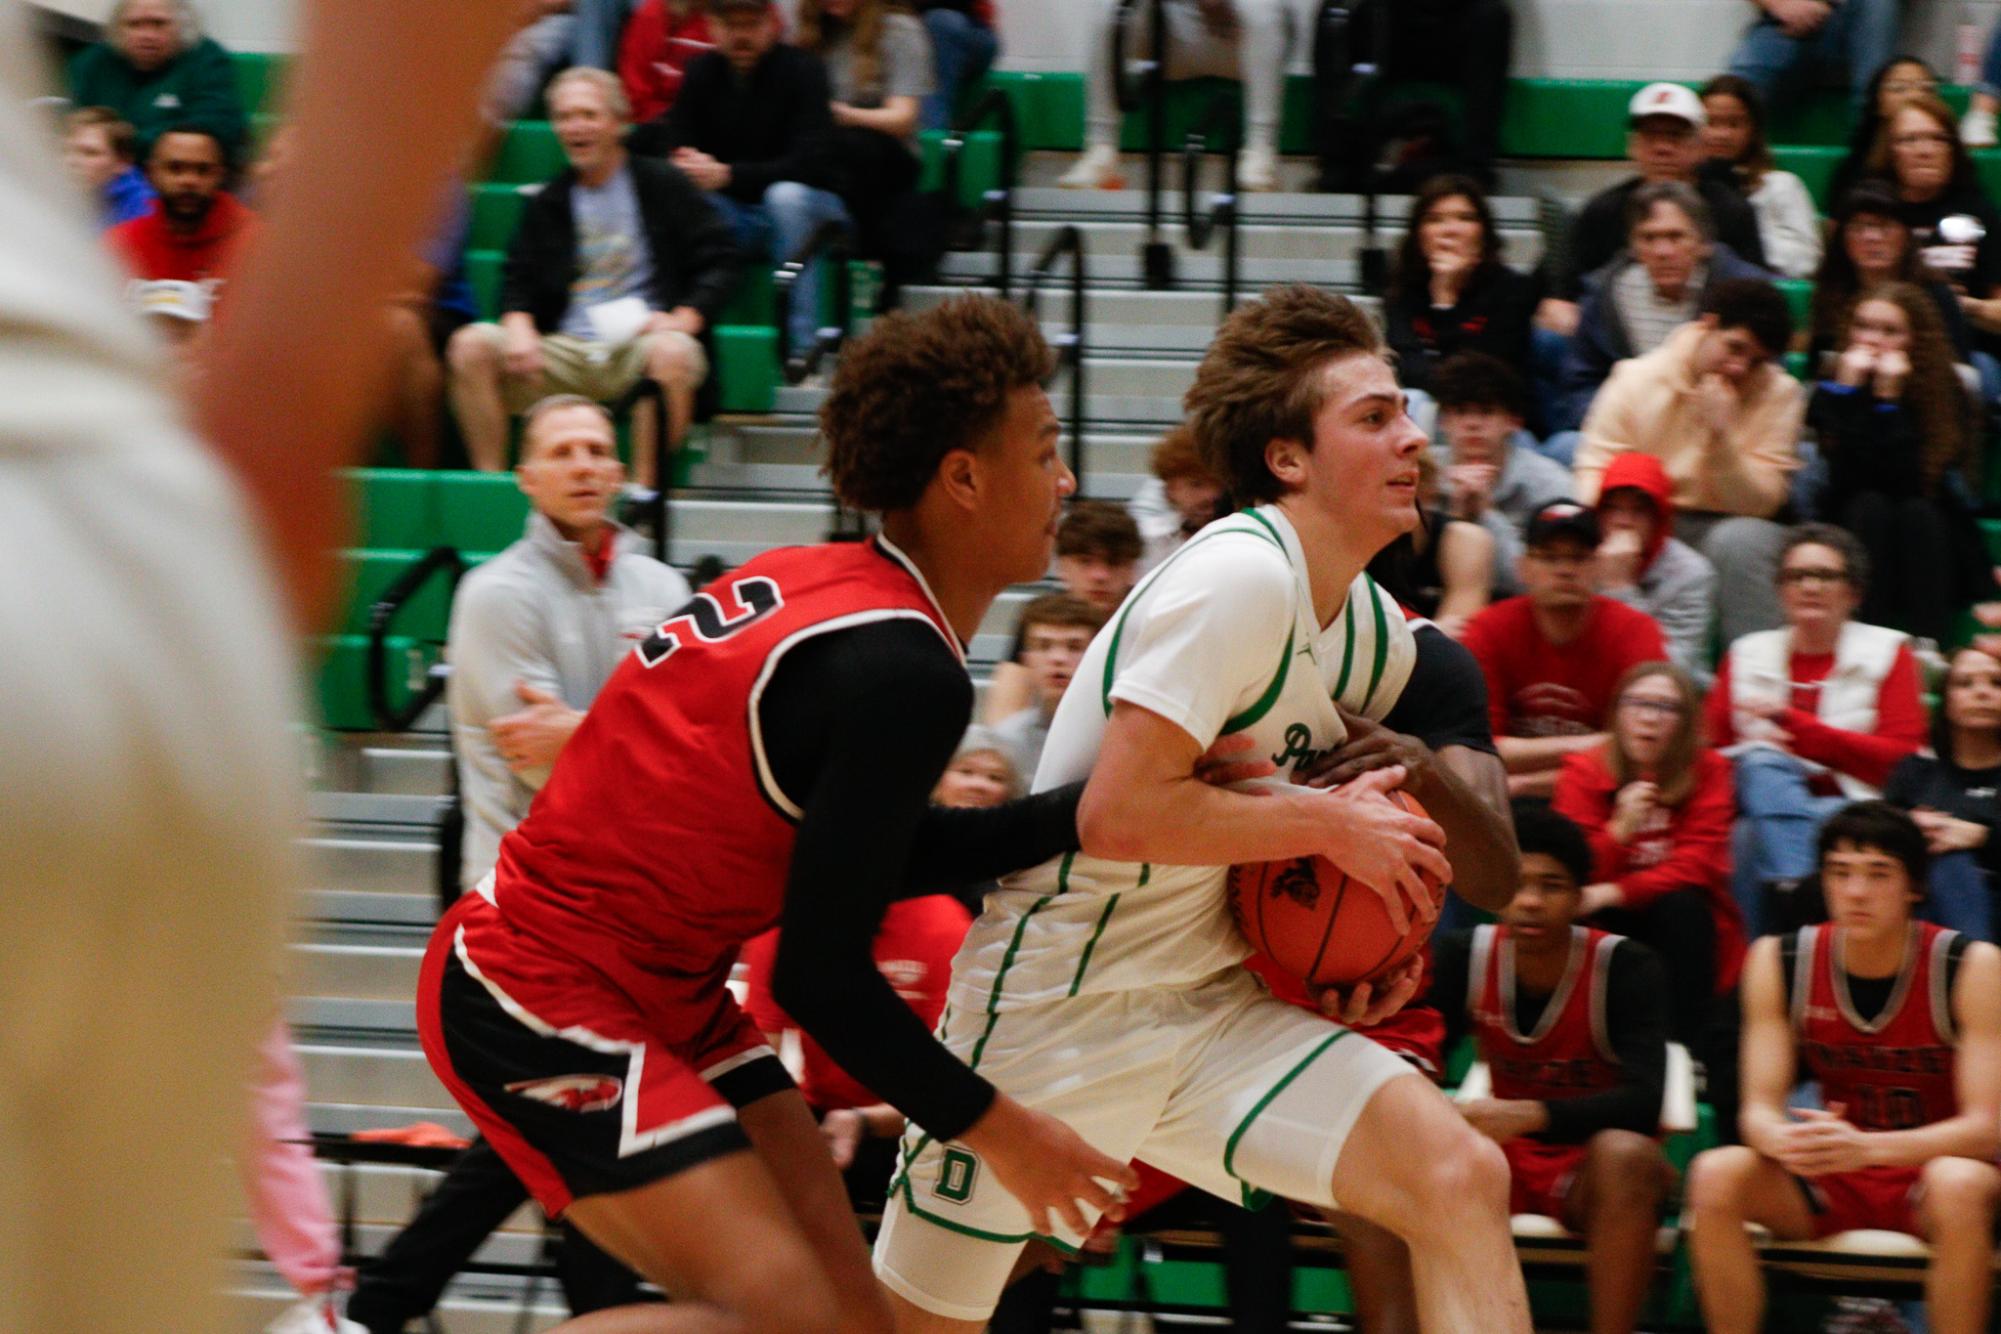 Boys+basketball+vs.+Maize+%28Photos+by+Laurisa+Rooney%29